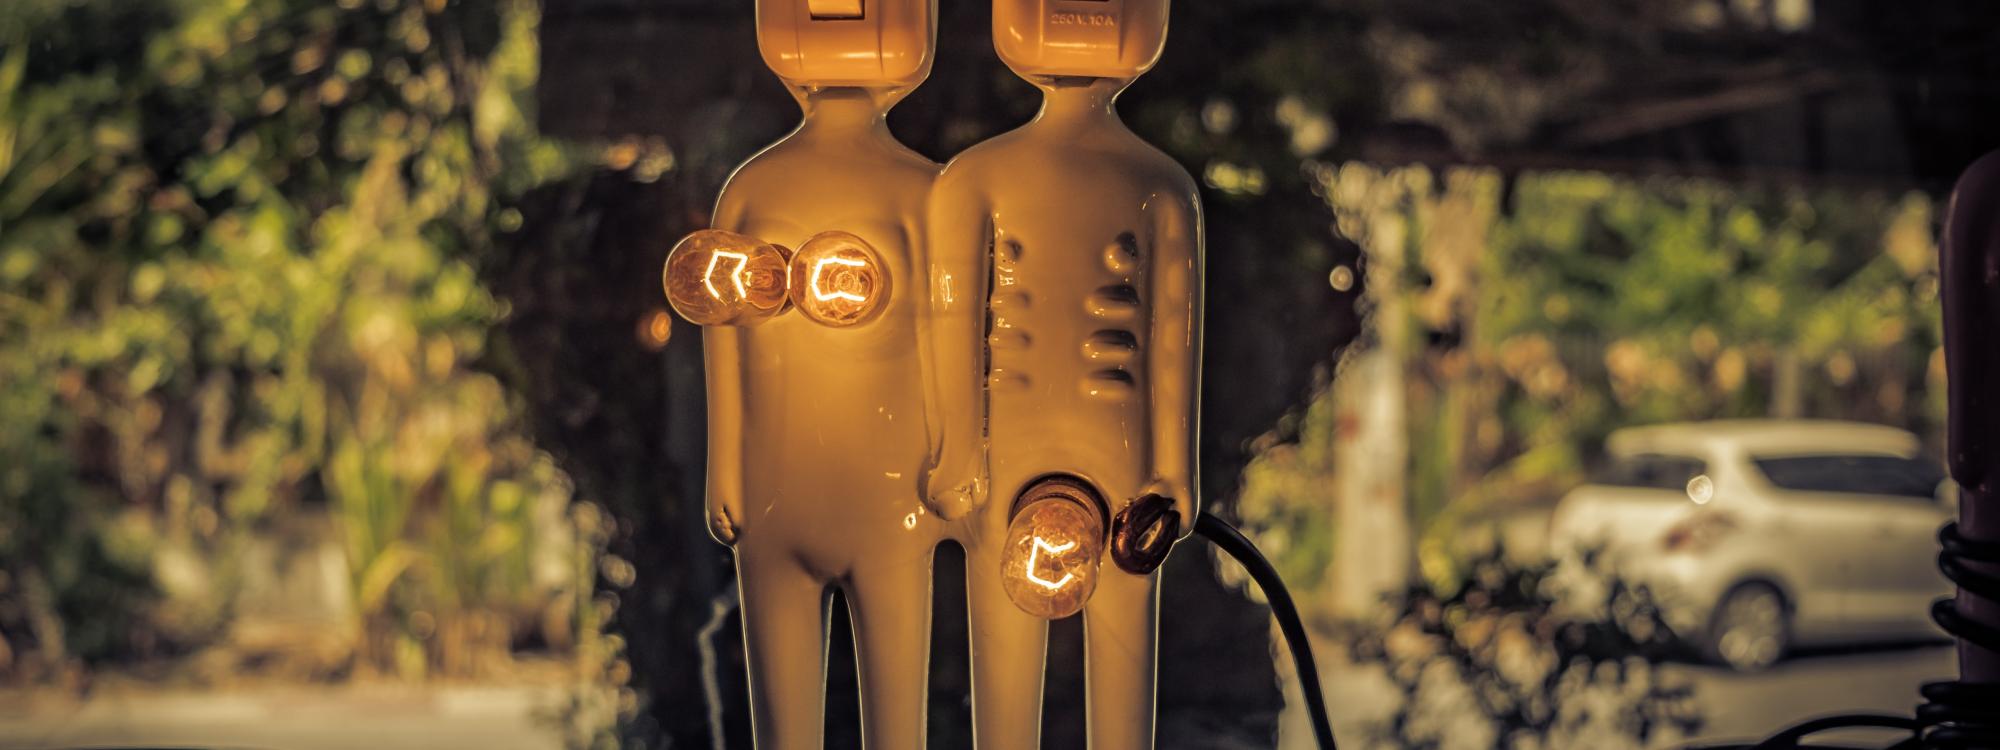 Power plugs in the shape of a man and woman's body